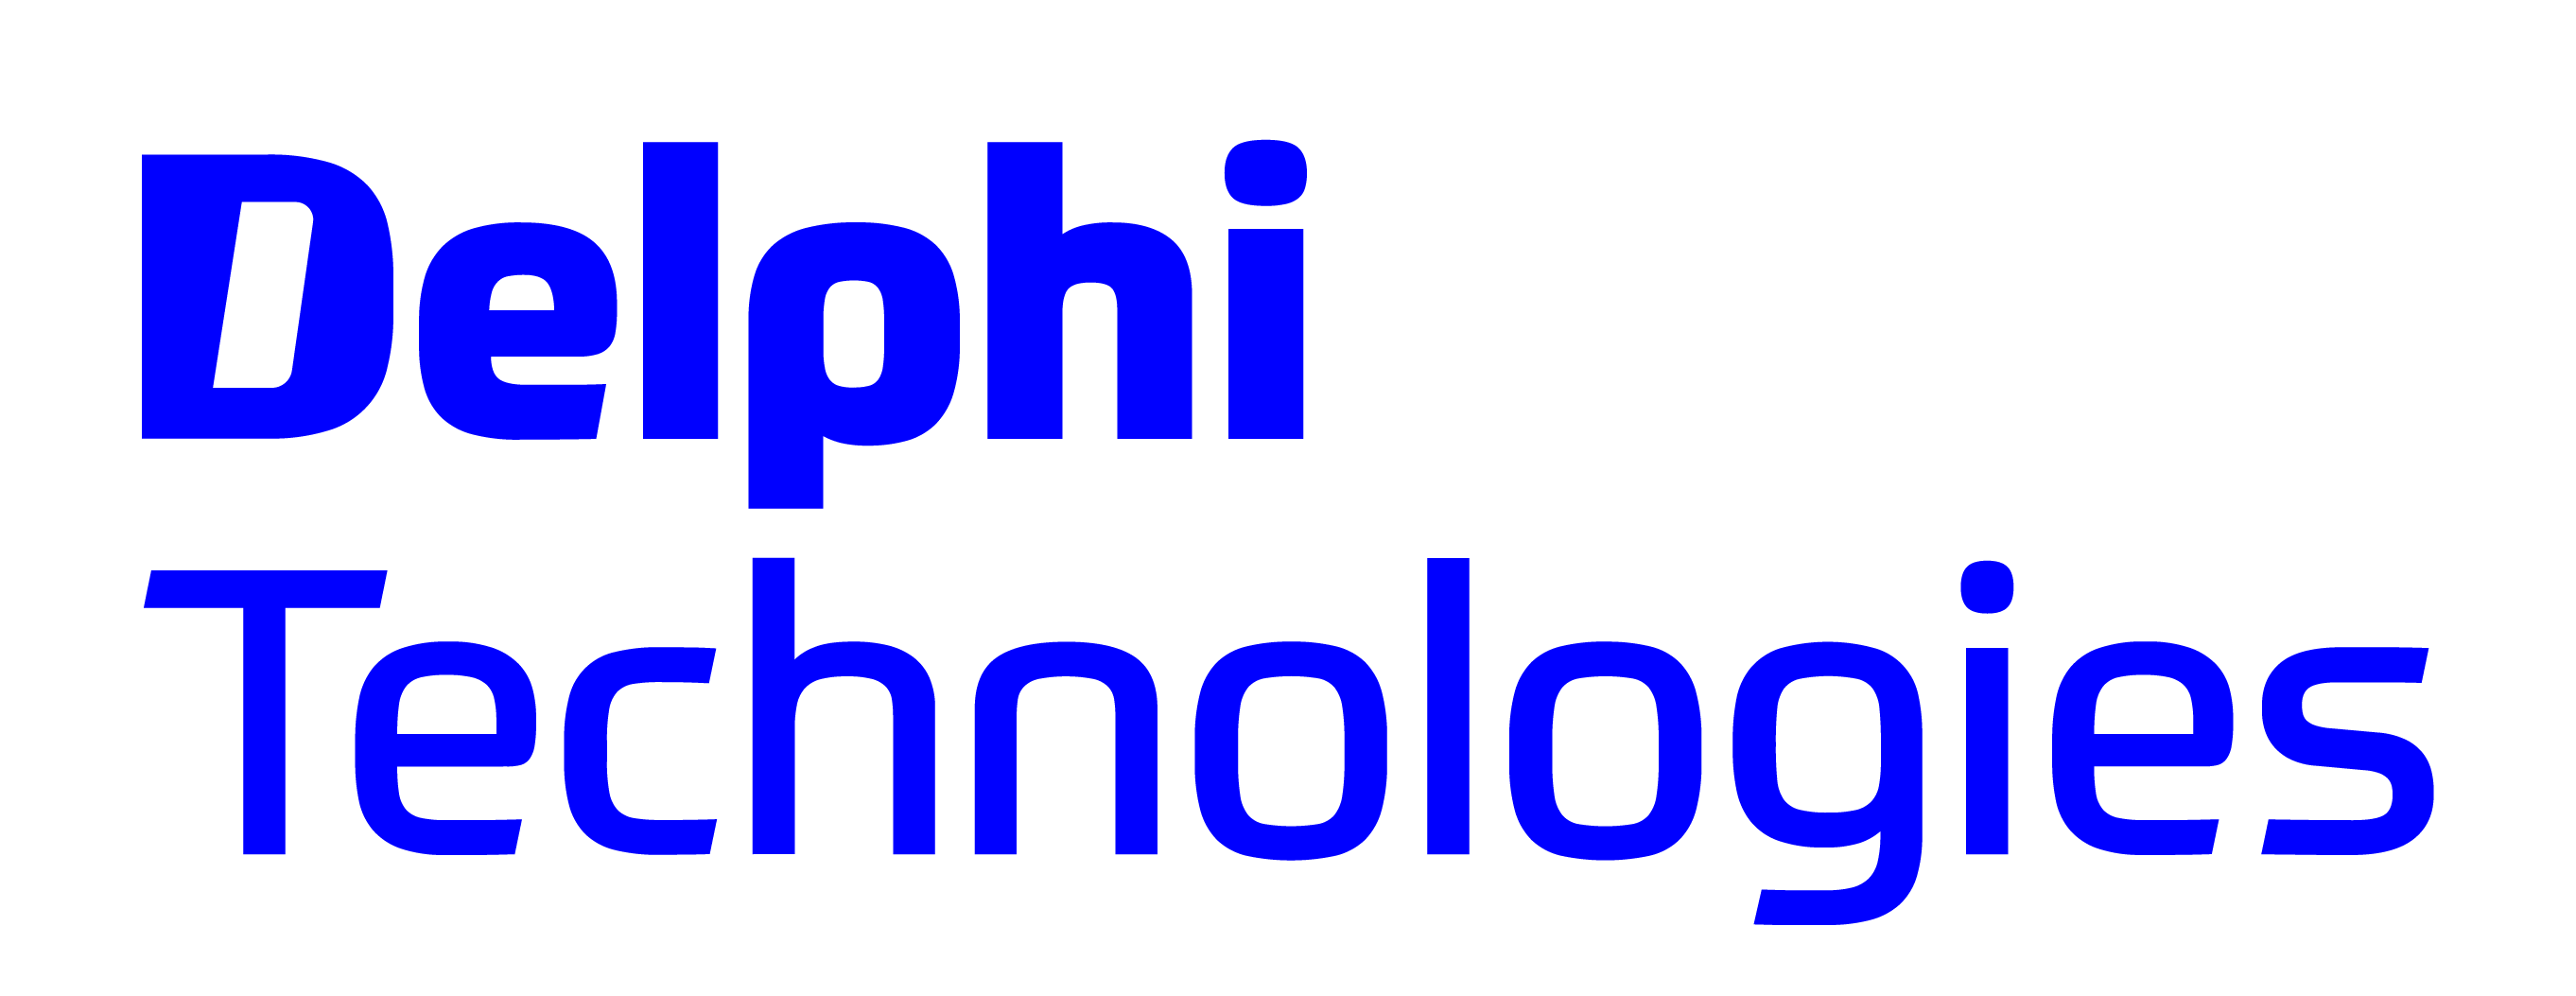 Advanced propulsion and aftermarket solutions │Delphi Technologies.